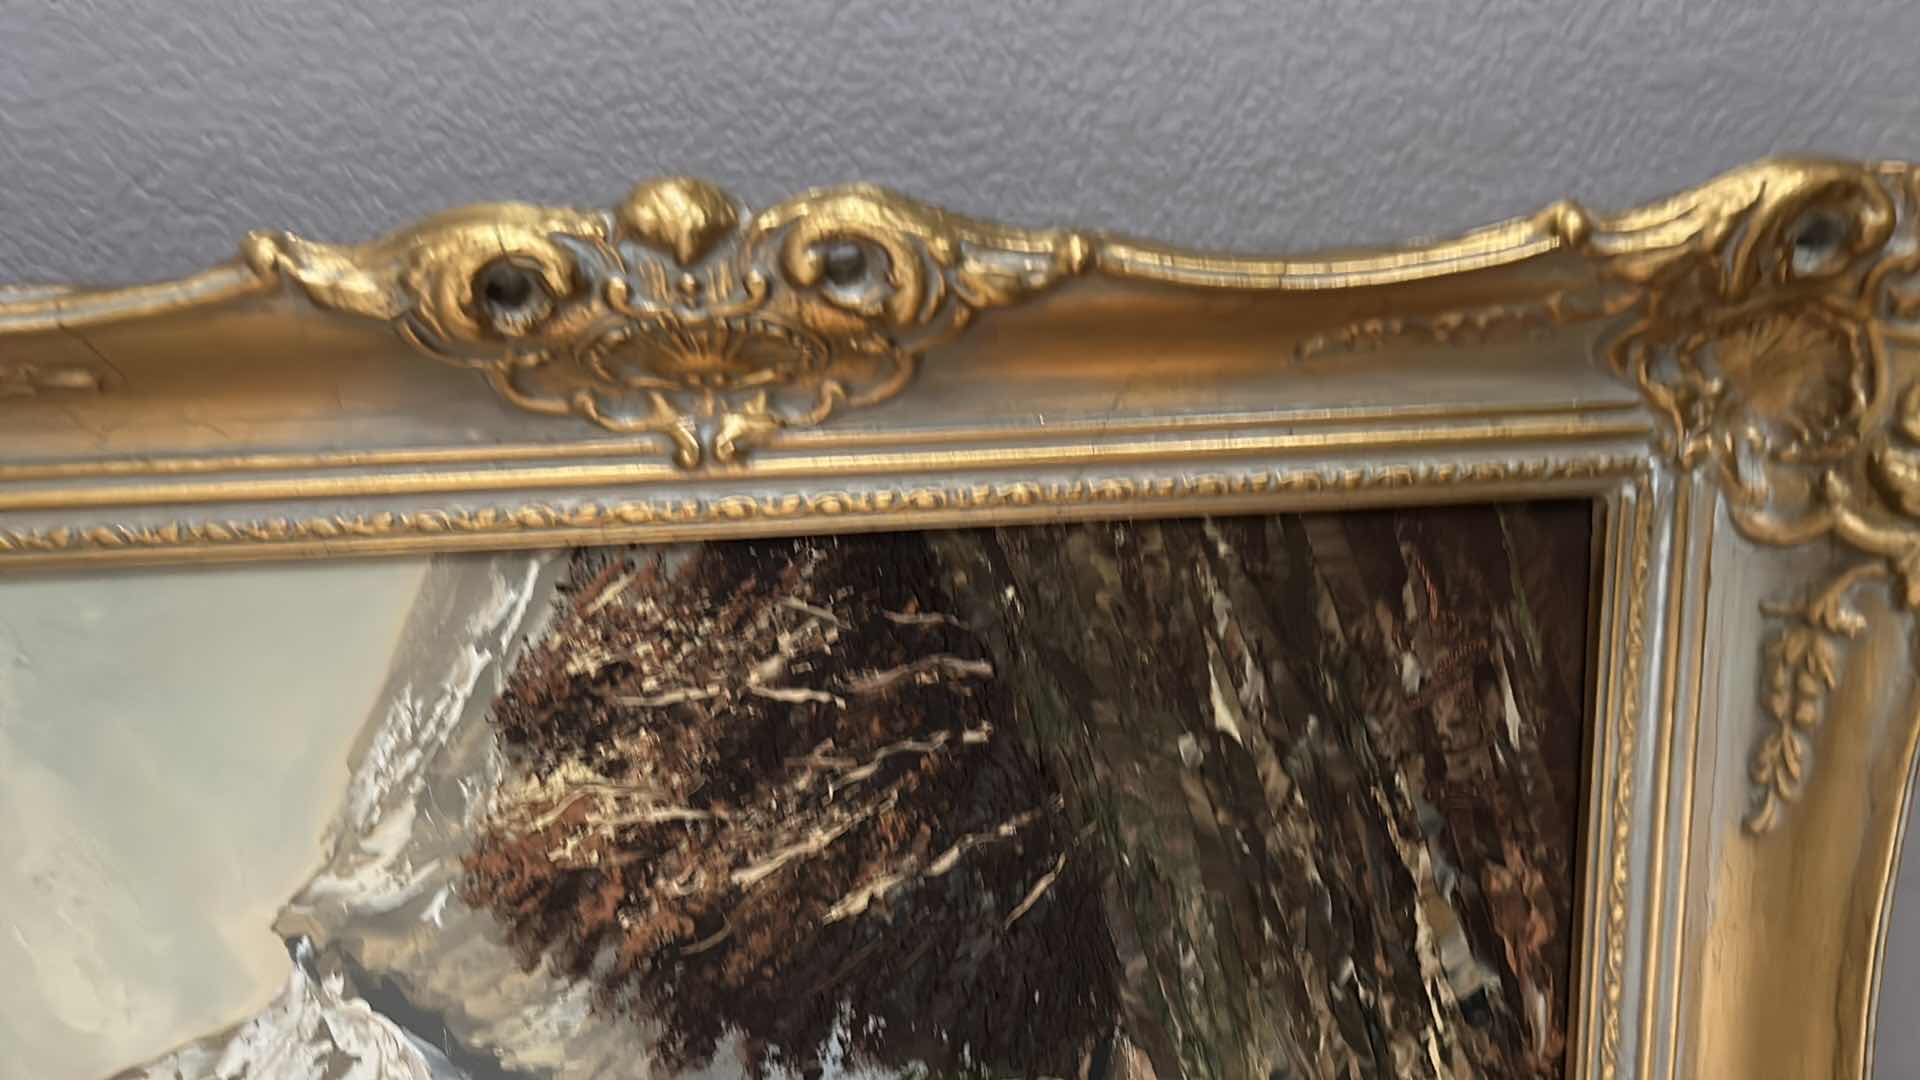 Photo 4 of WALL DECOR - SIGNED PAINT ON CANVAS LANDSCAPE, ORNATE GOLD FRAMED ARTWORK 34” x 25”